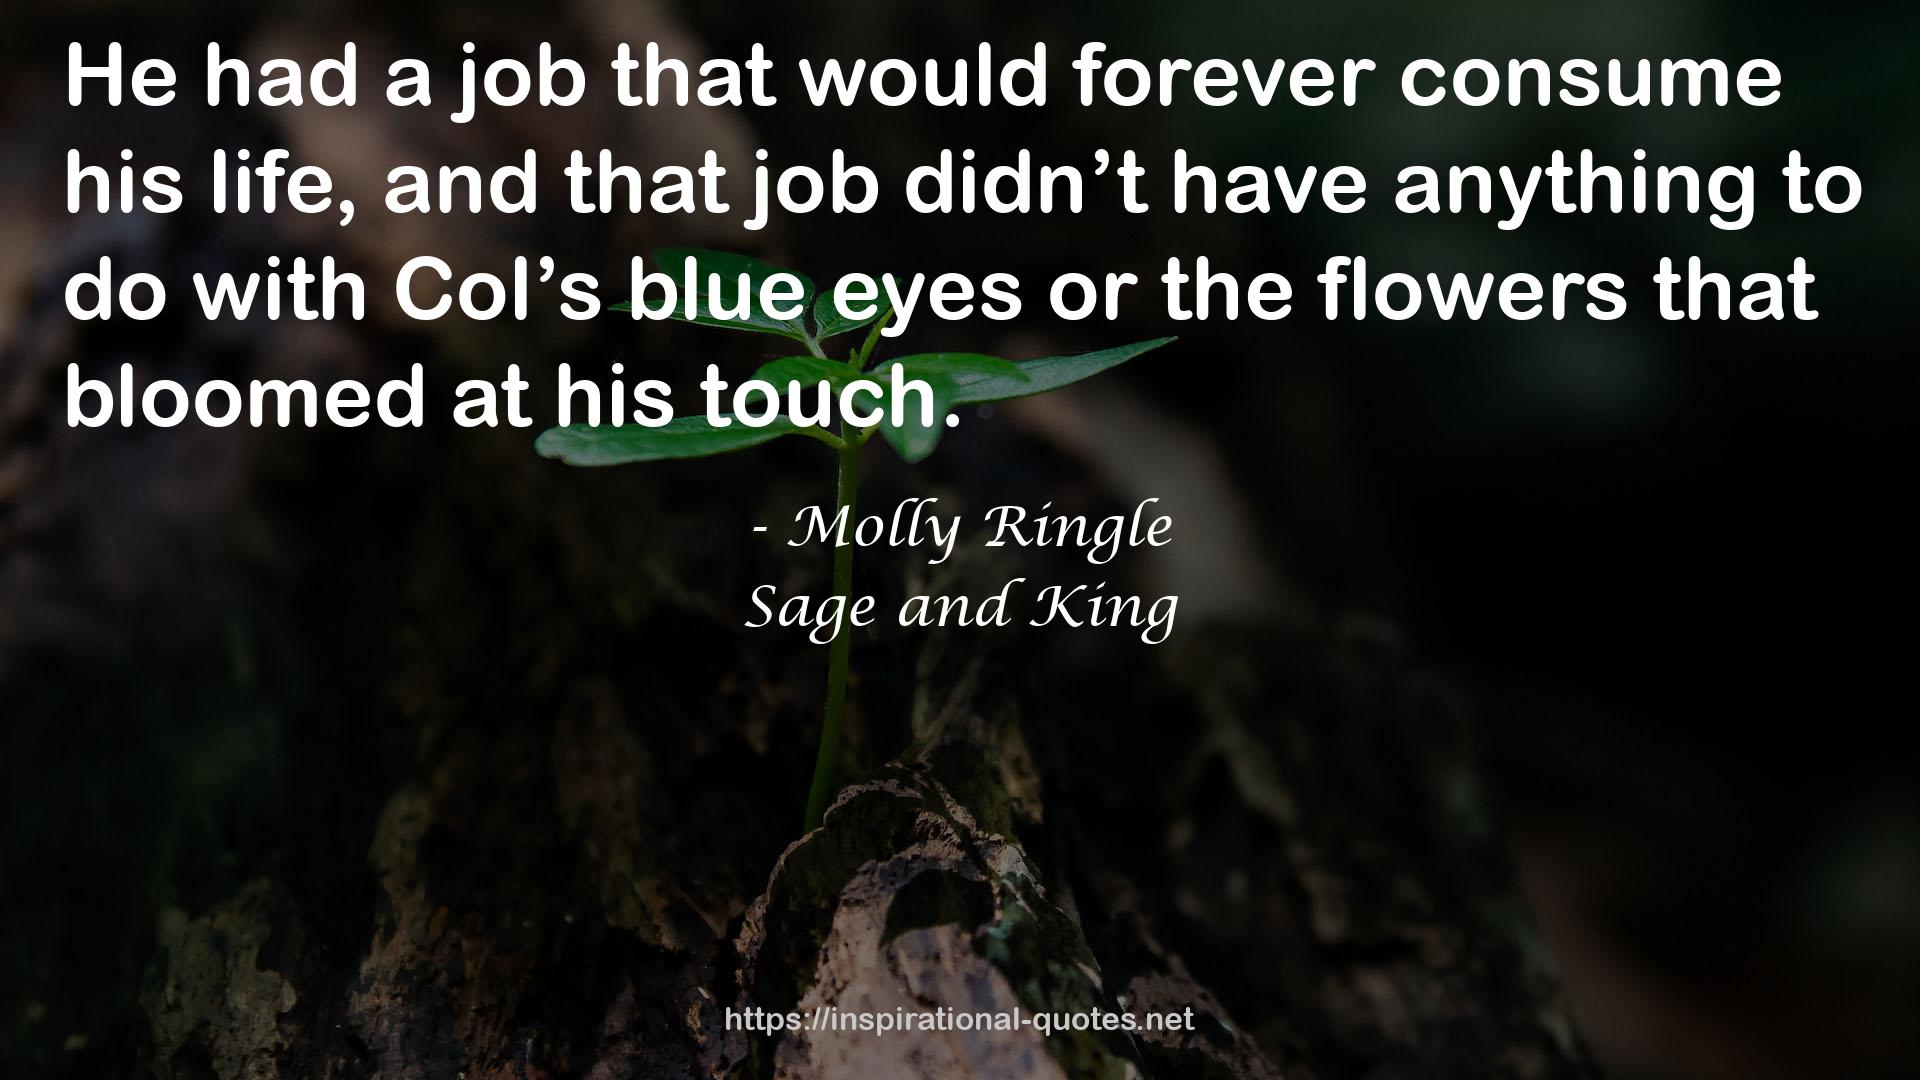 Sage and King QUOTES